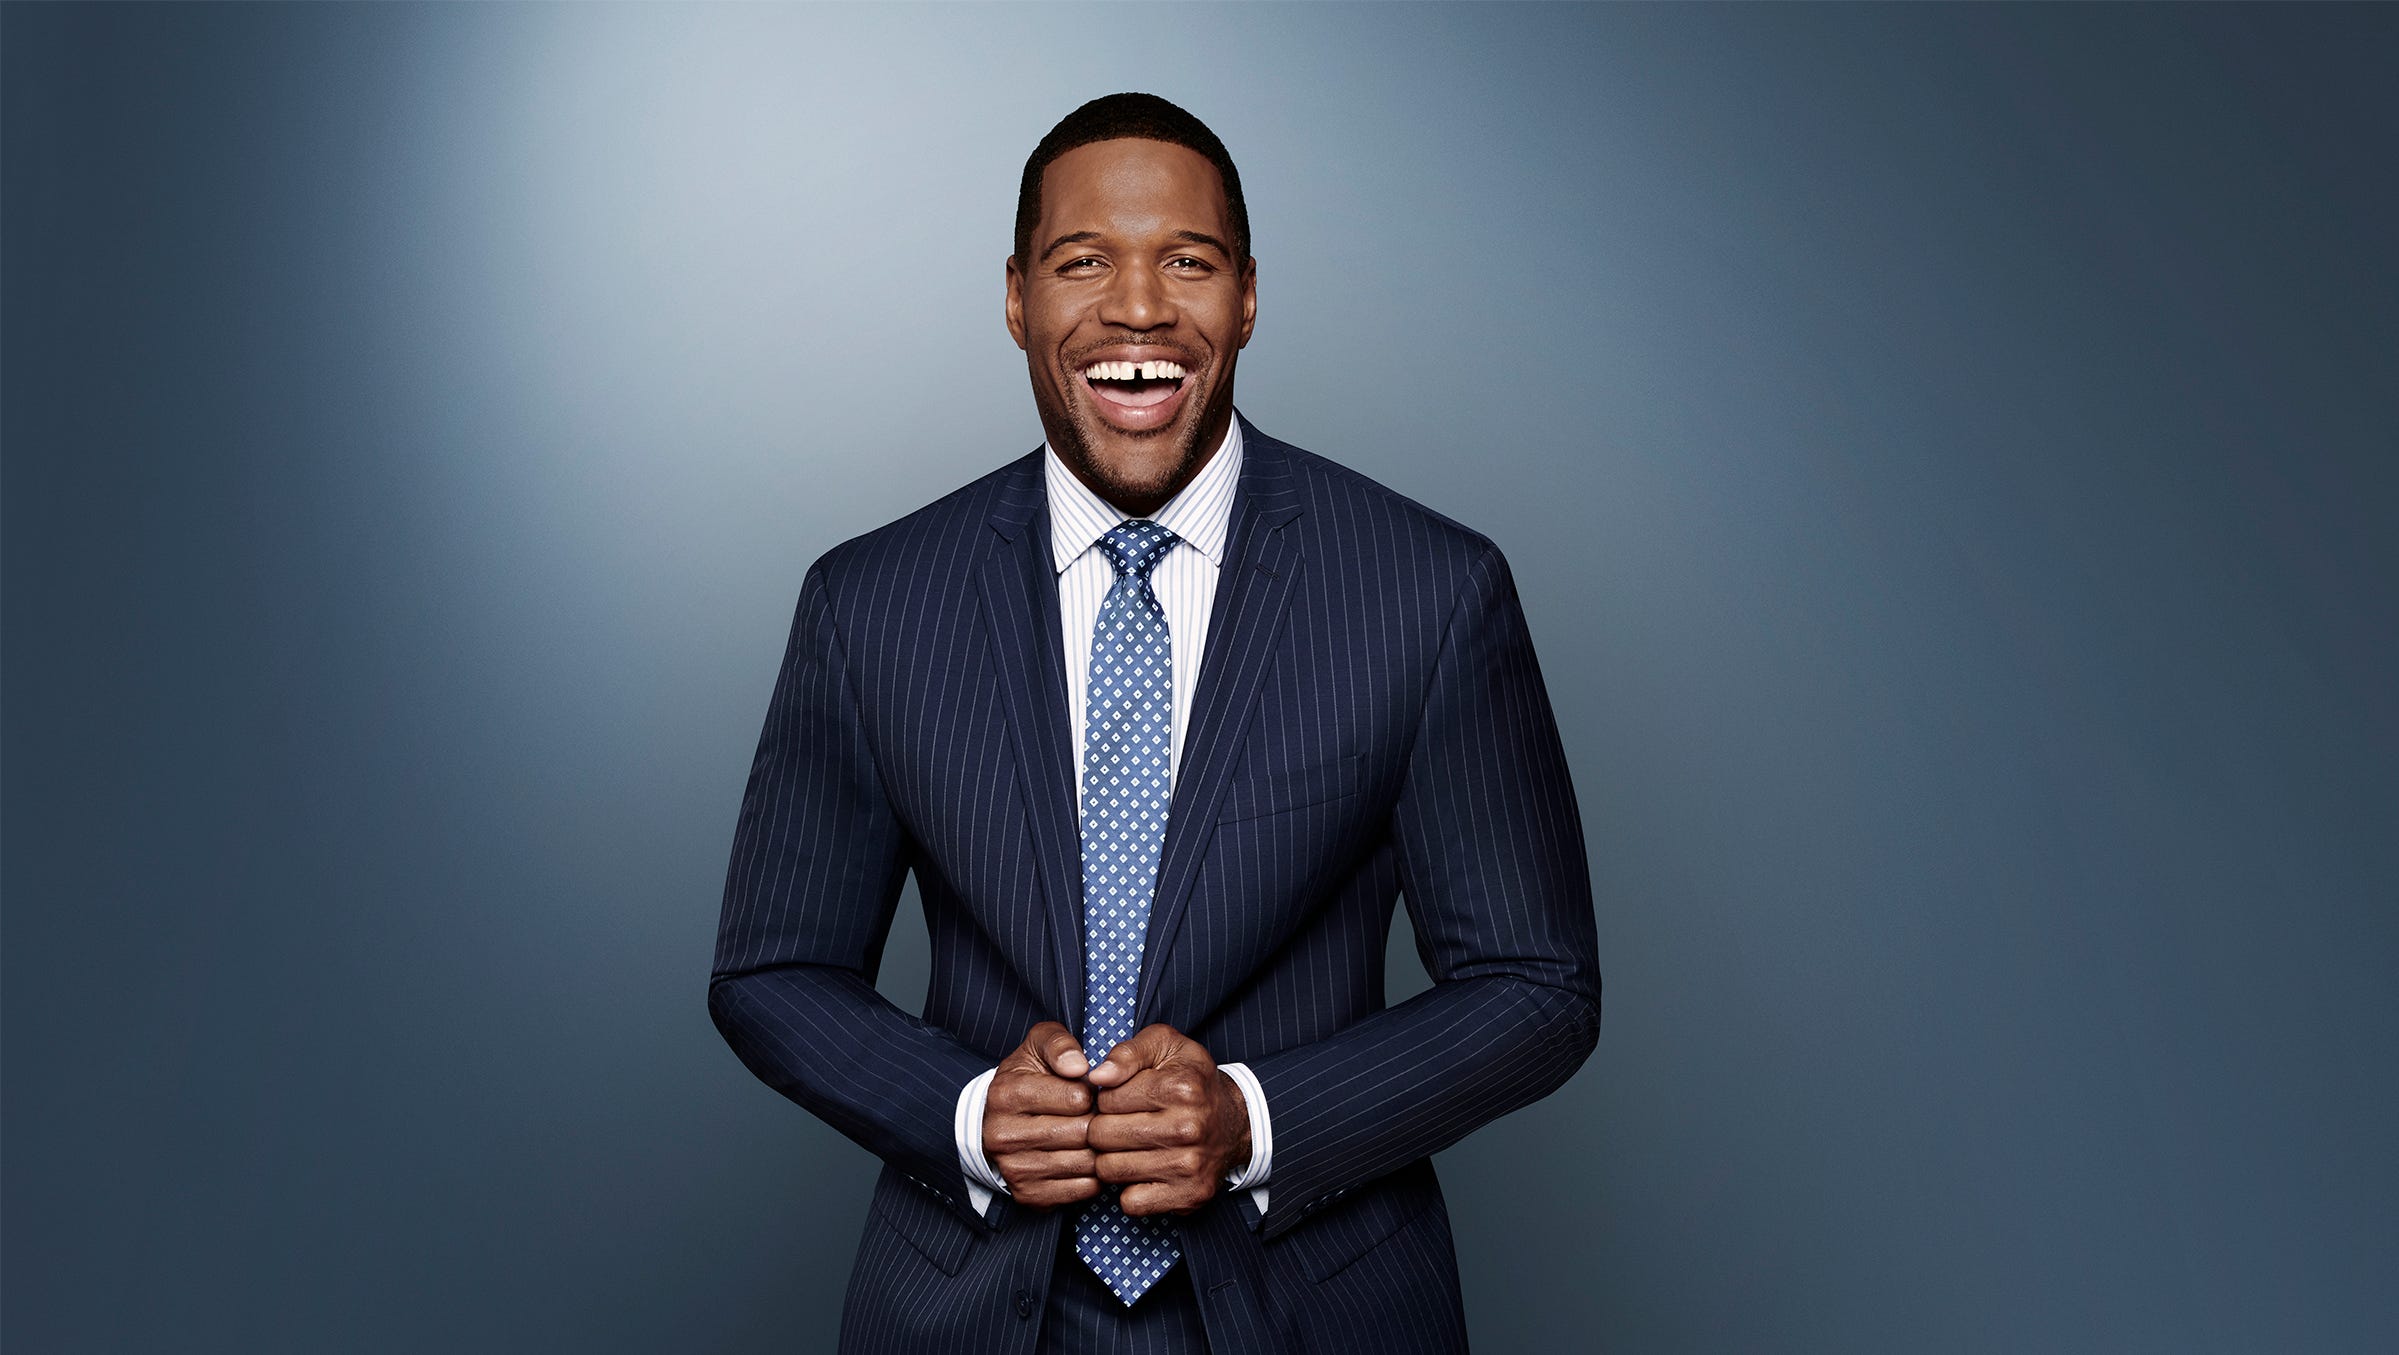 Listen up, fellas: Michael Strahan wants to dress you